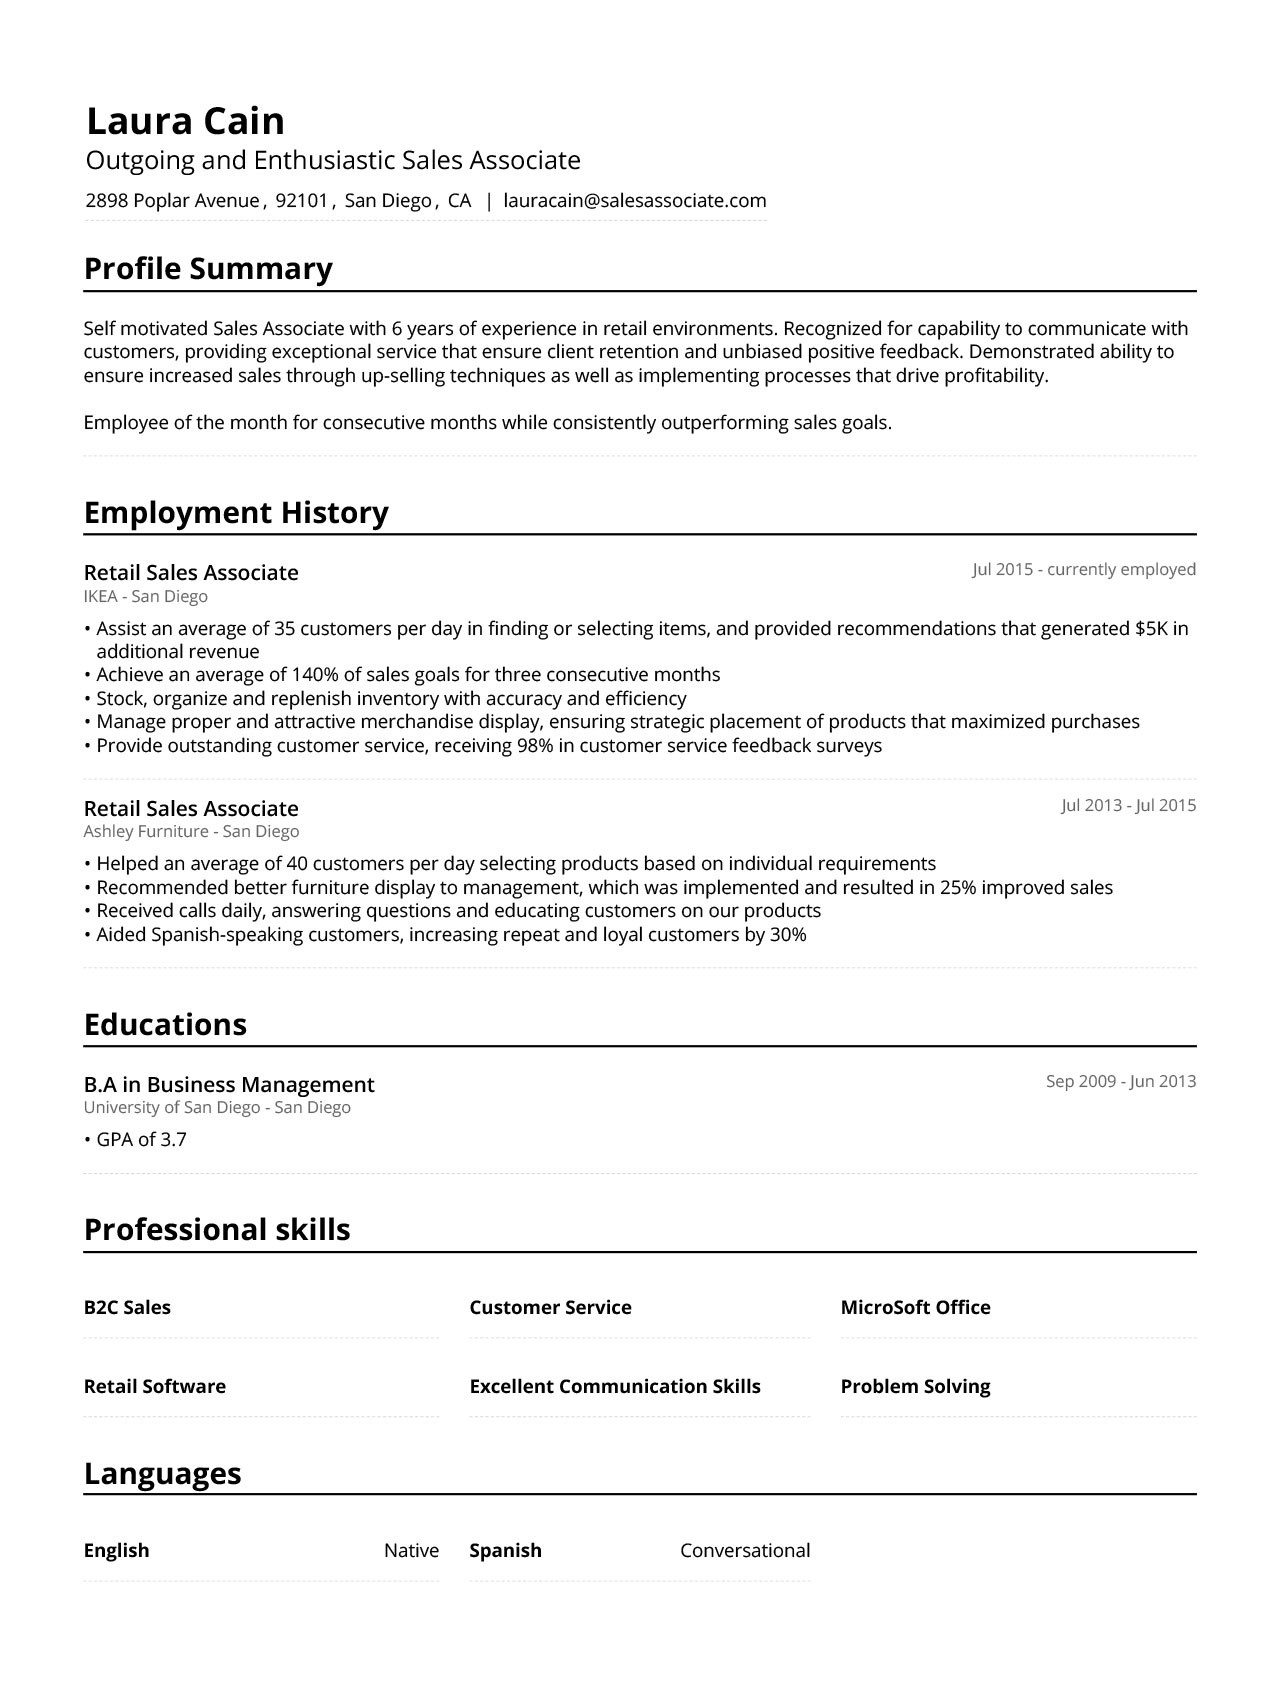 Sample Resume for Retail Sales Position Sales associate Resume Example & Writing Guide [2021] – Jofibo